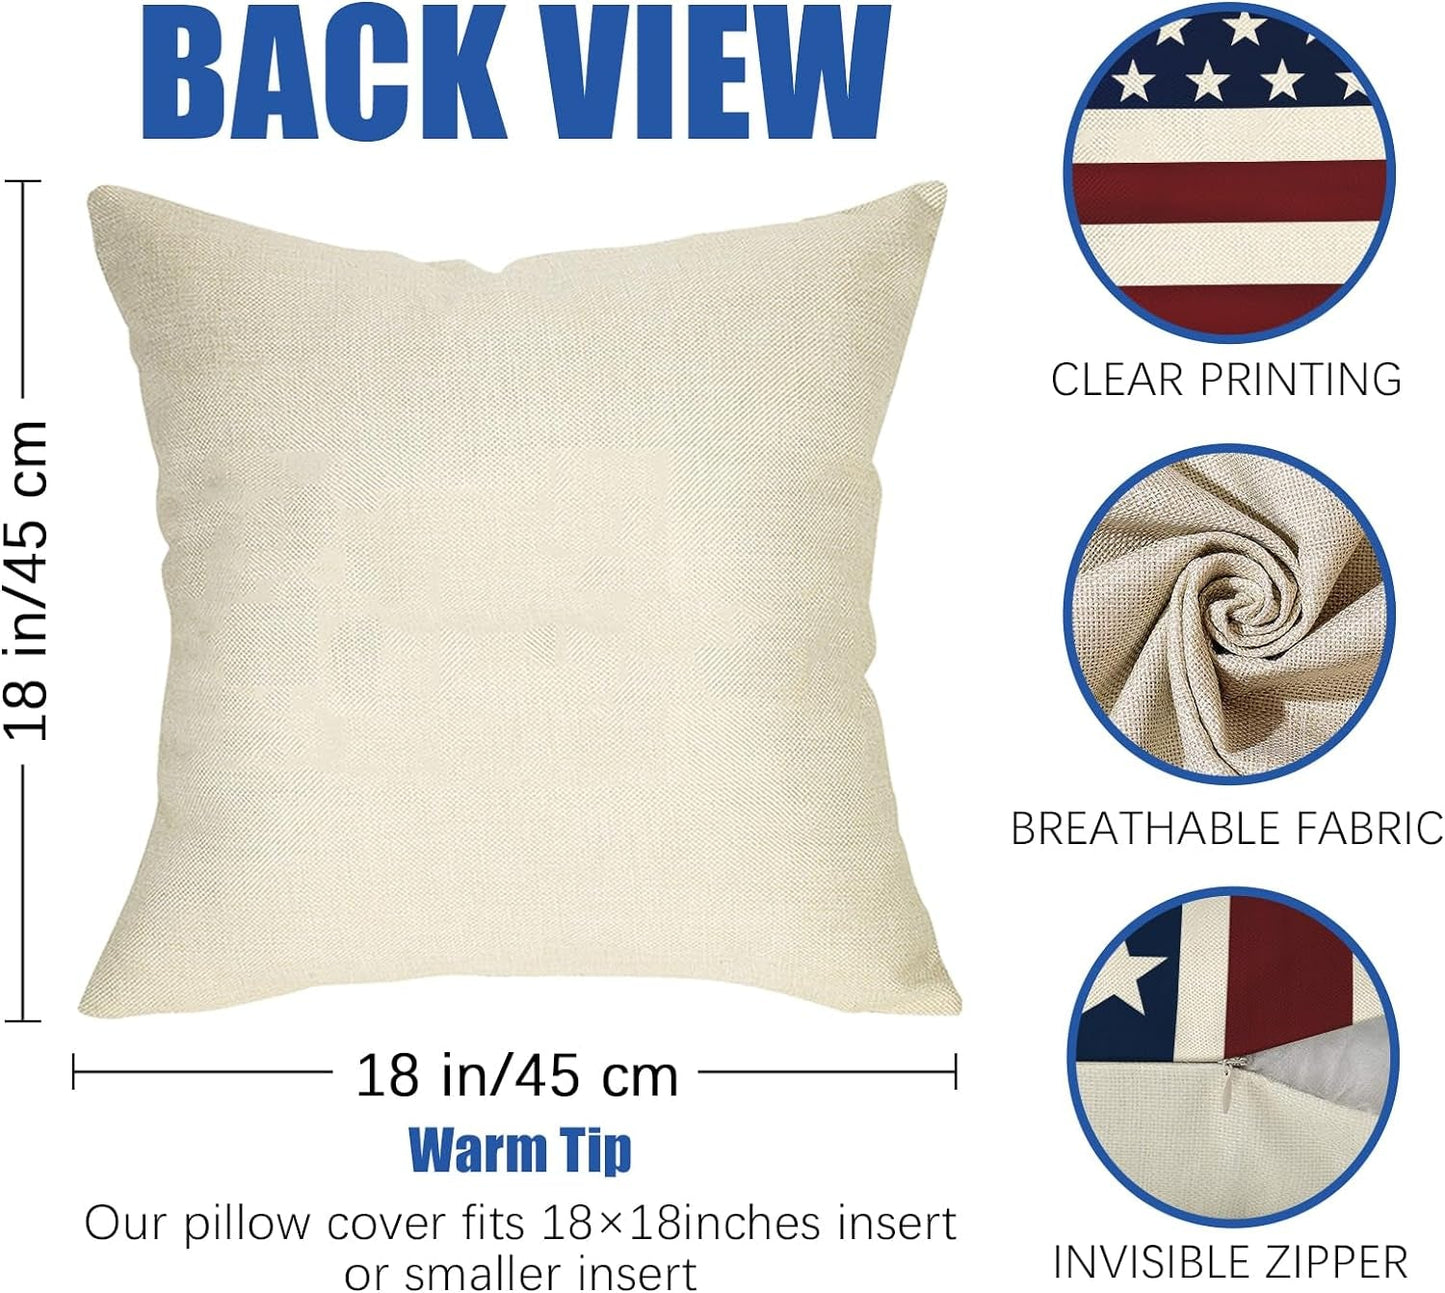 4Th of July Patriotic Decorative Throw Pillow Covers 18X18 Set of 4, America USA Rustic Red White Blue Stripes Stars Outdoor Pillowcase, American Independence Day Cushion Case Home Decor